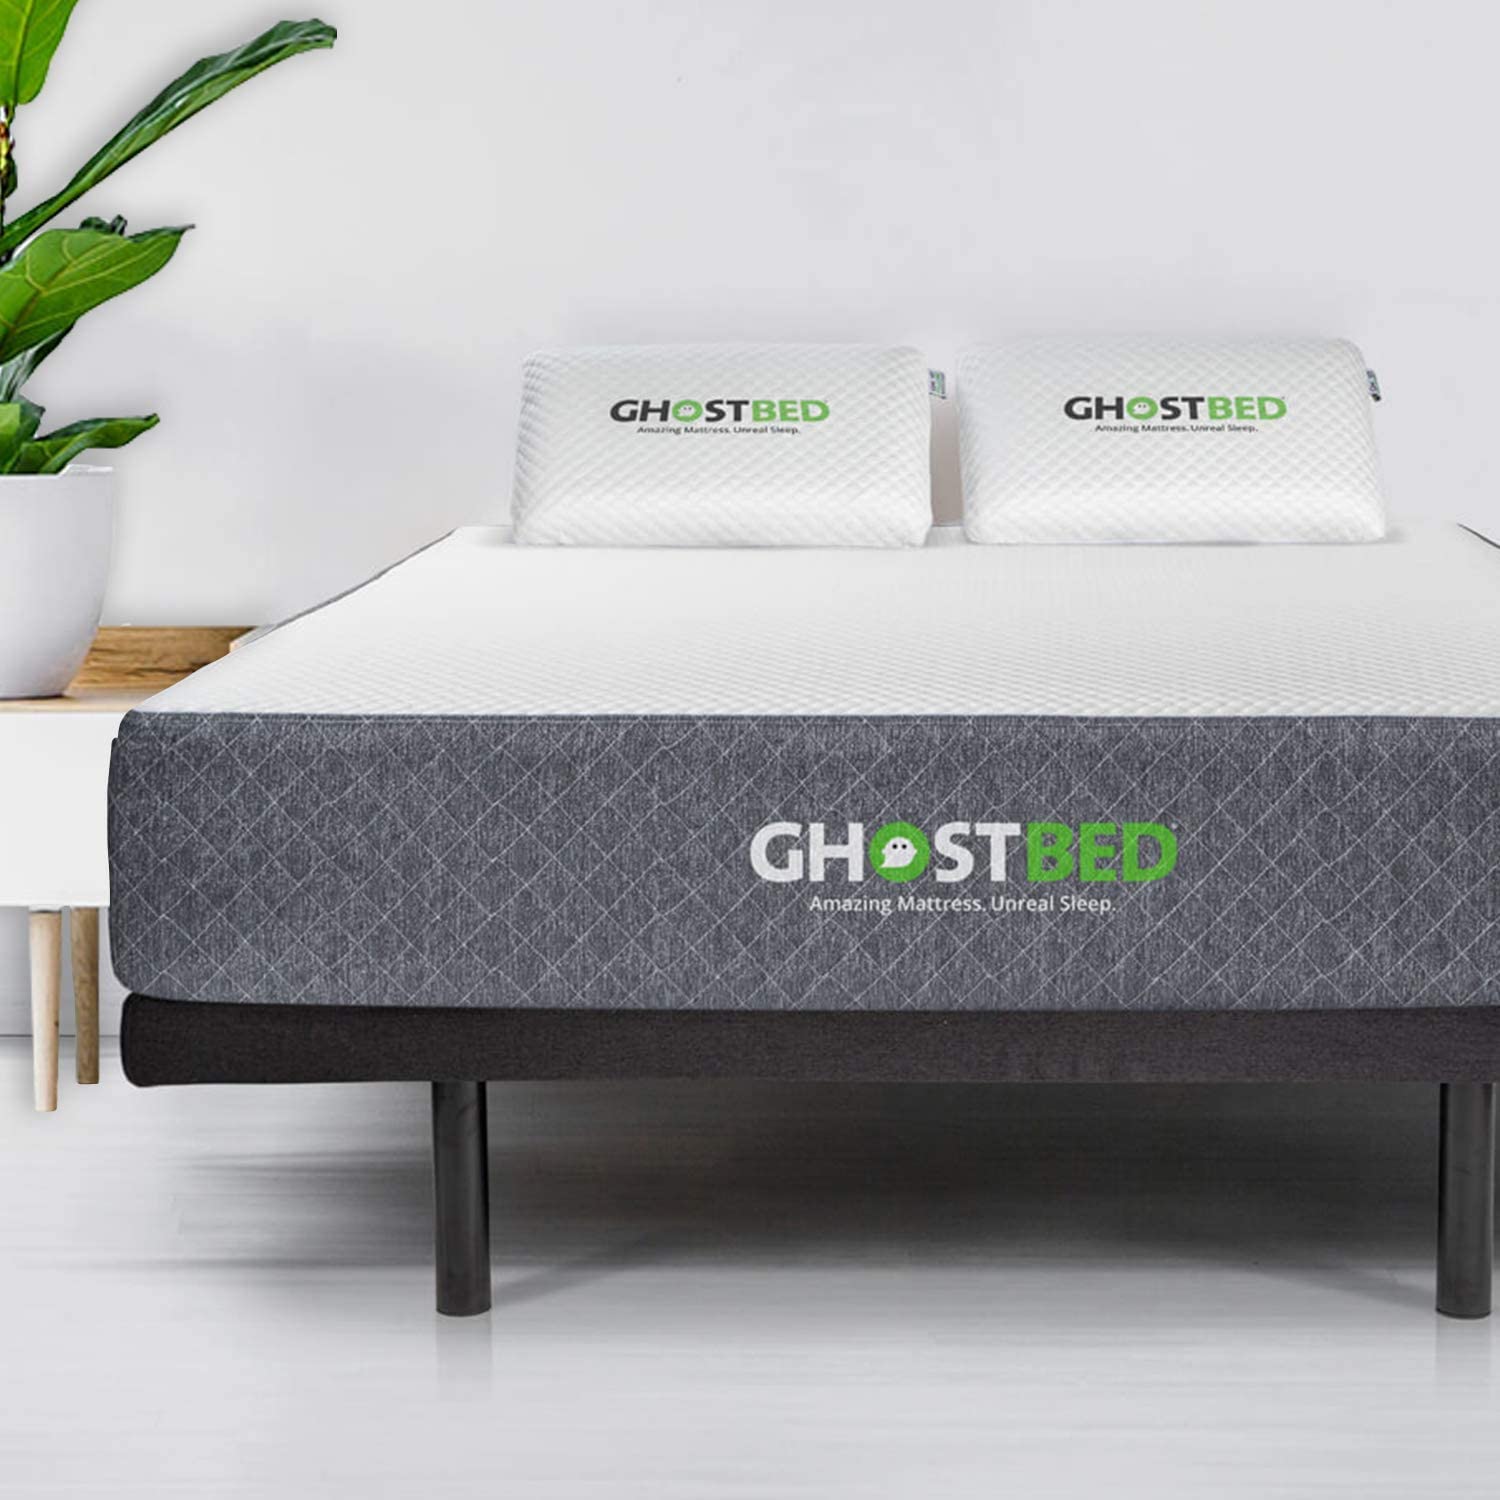 Ghostbed Clasic mattress review